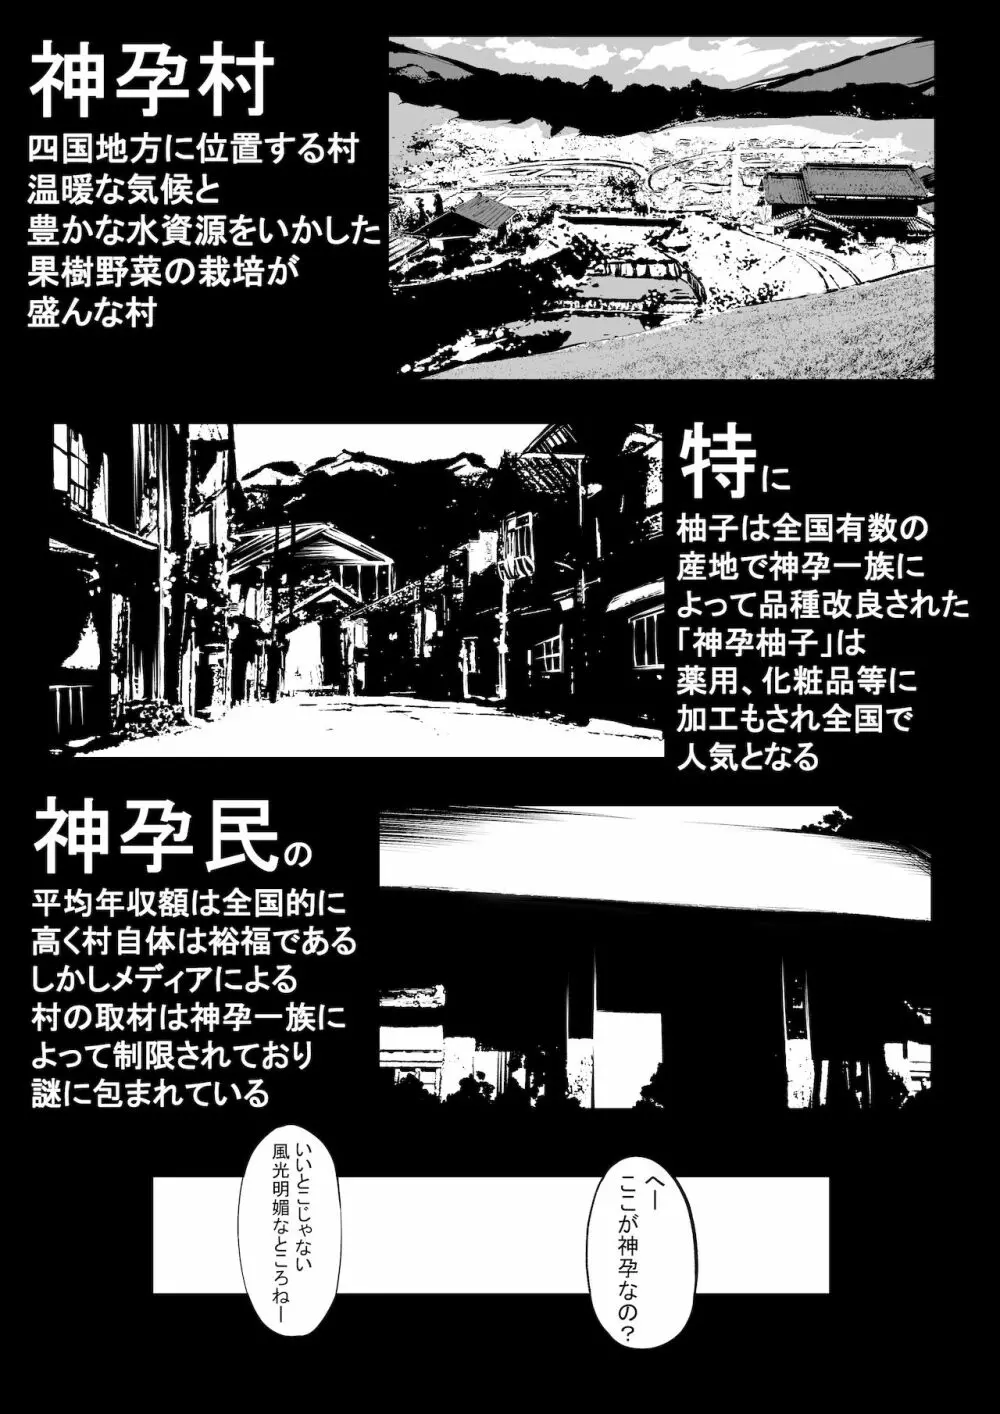 The 神孕村～やっくをやっつけろの巻～ Page.5